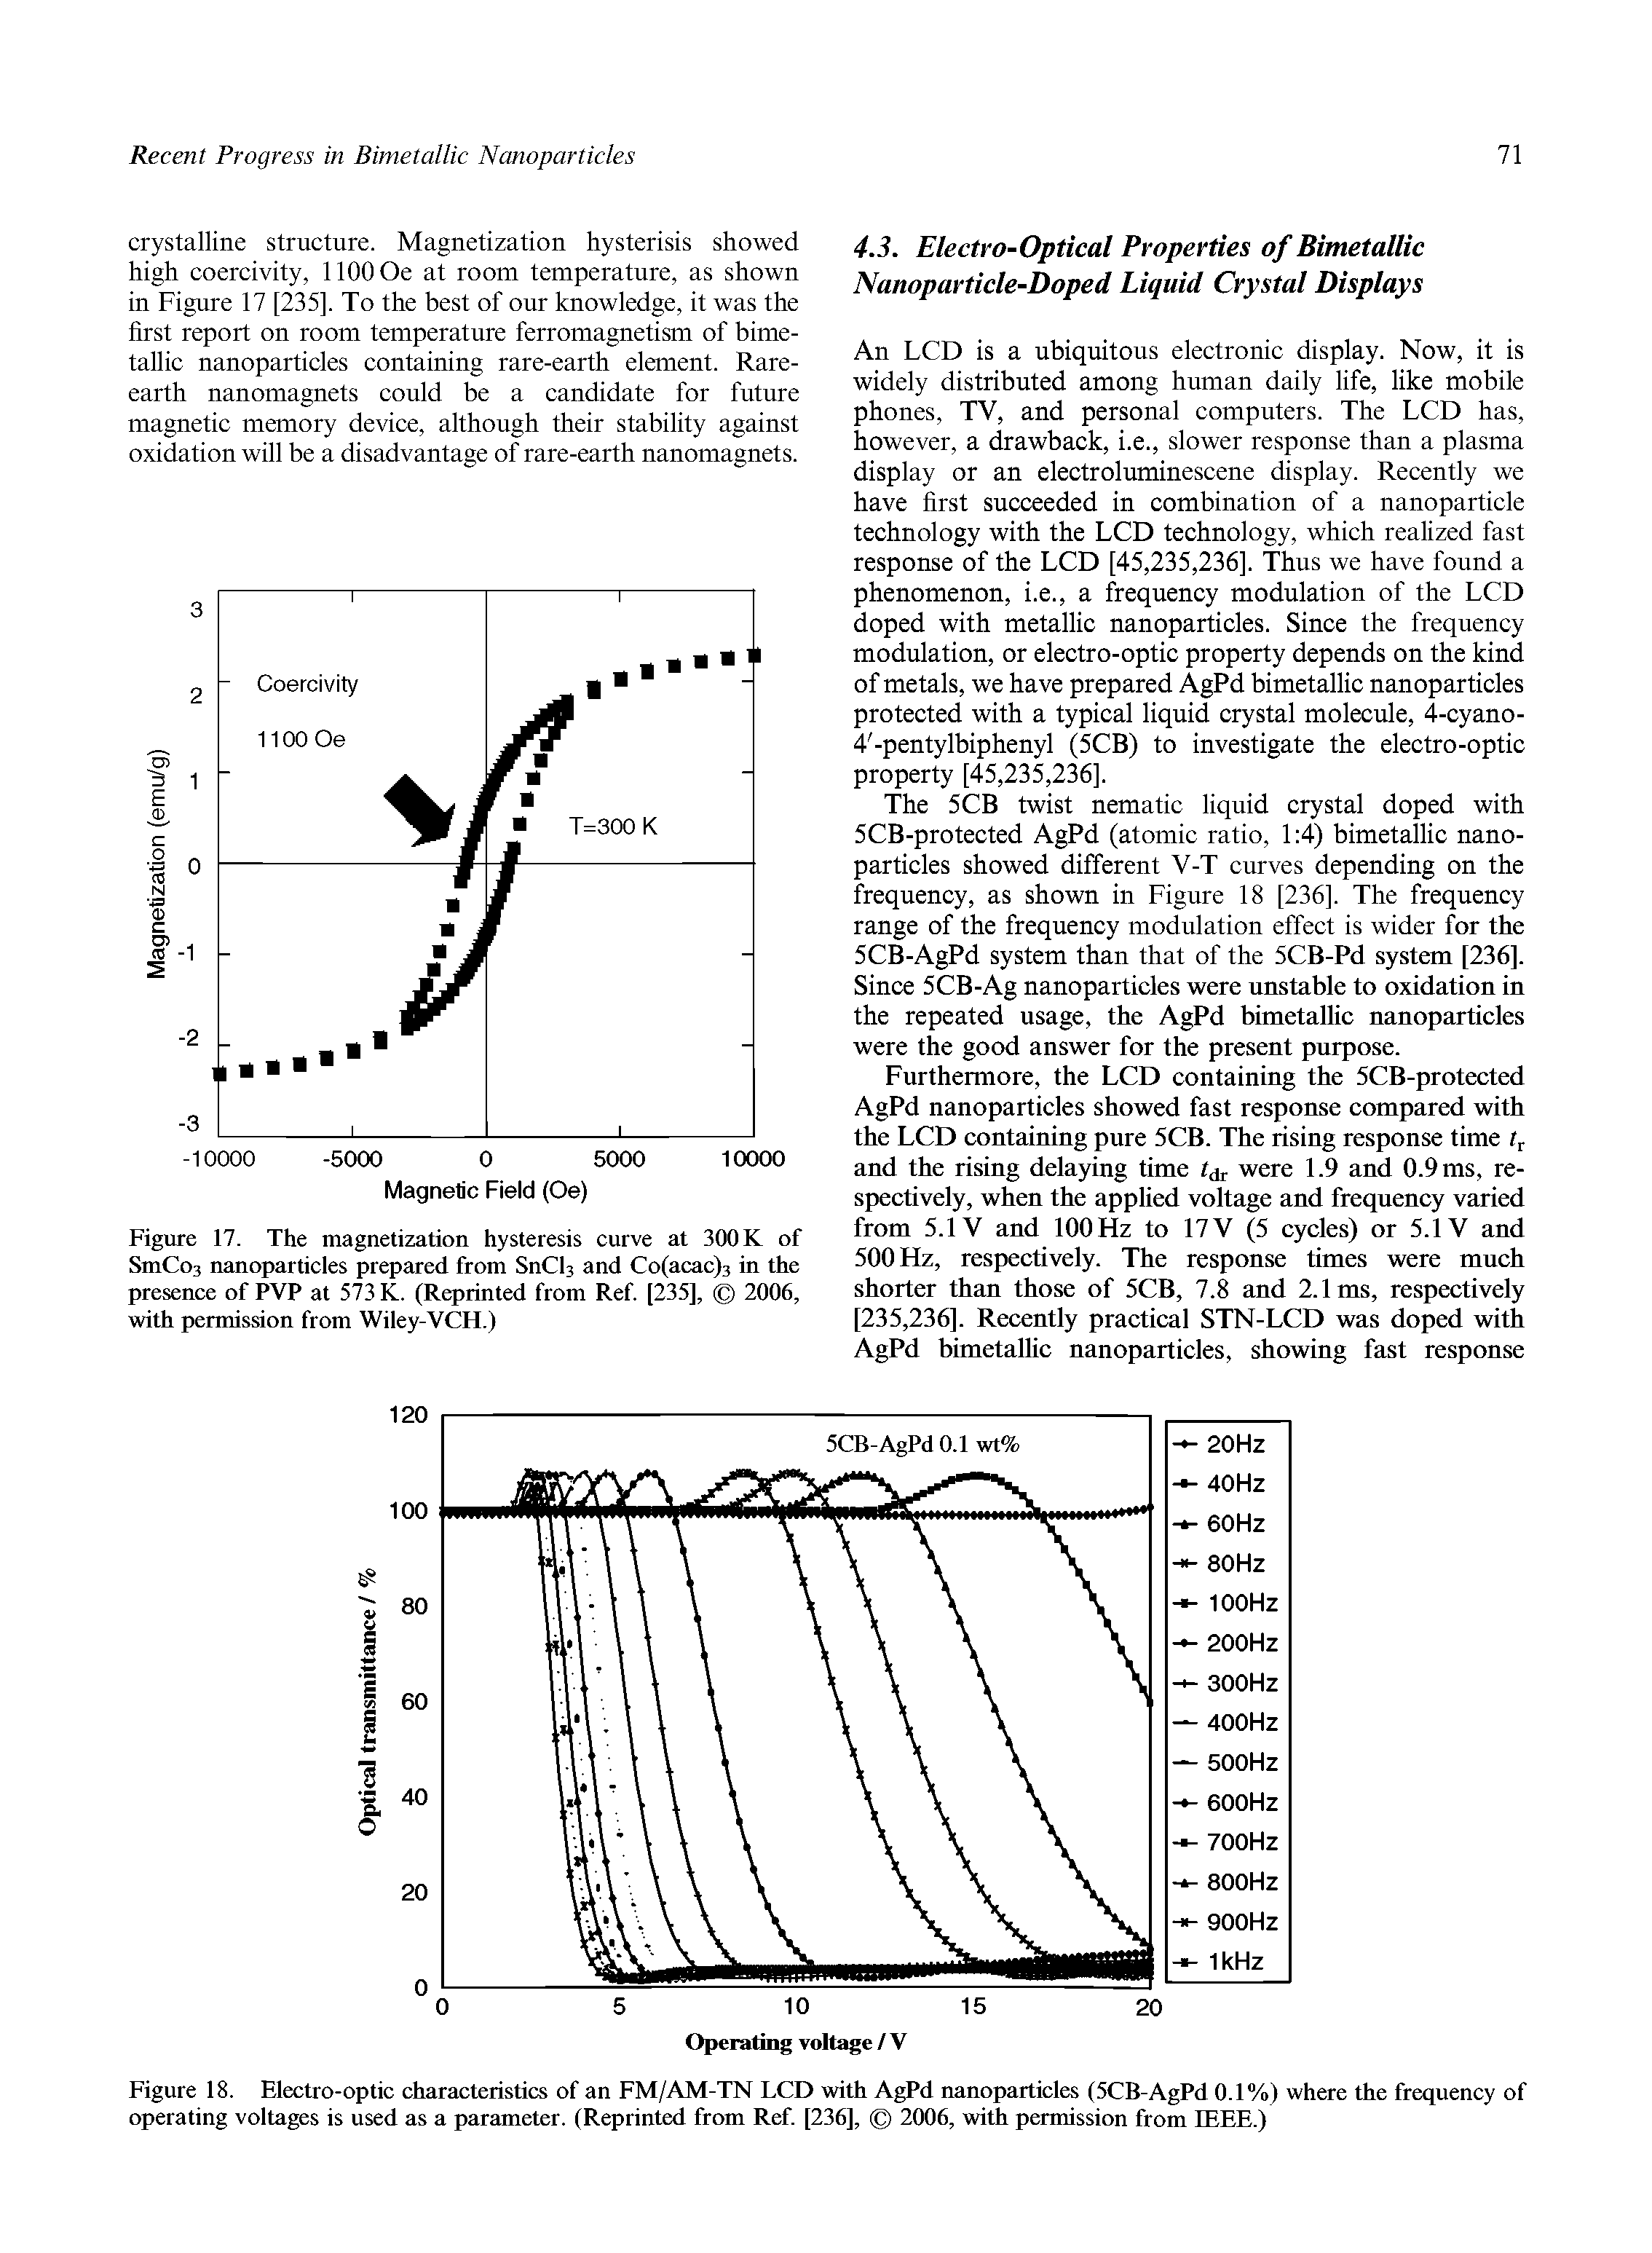 Figure 17. The magnetization hysteresis curve at 300 K of SmCos nanoparticles prepared from SnCF and Cofacacfs in the presence of PVP at 573 K. (Reprinted from Ref [235], 2006, with permission from Wiley-VCH.)...